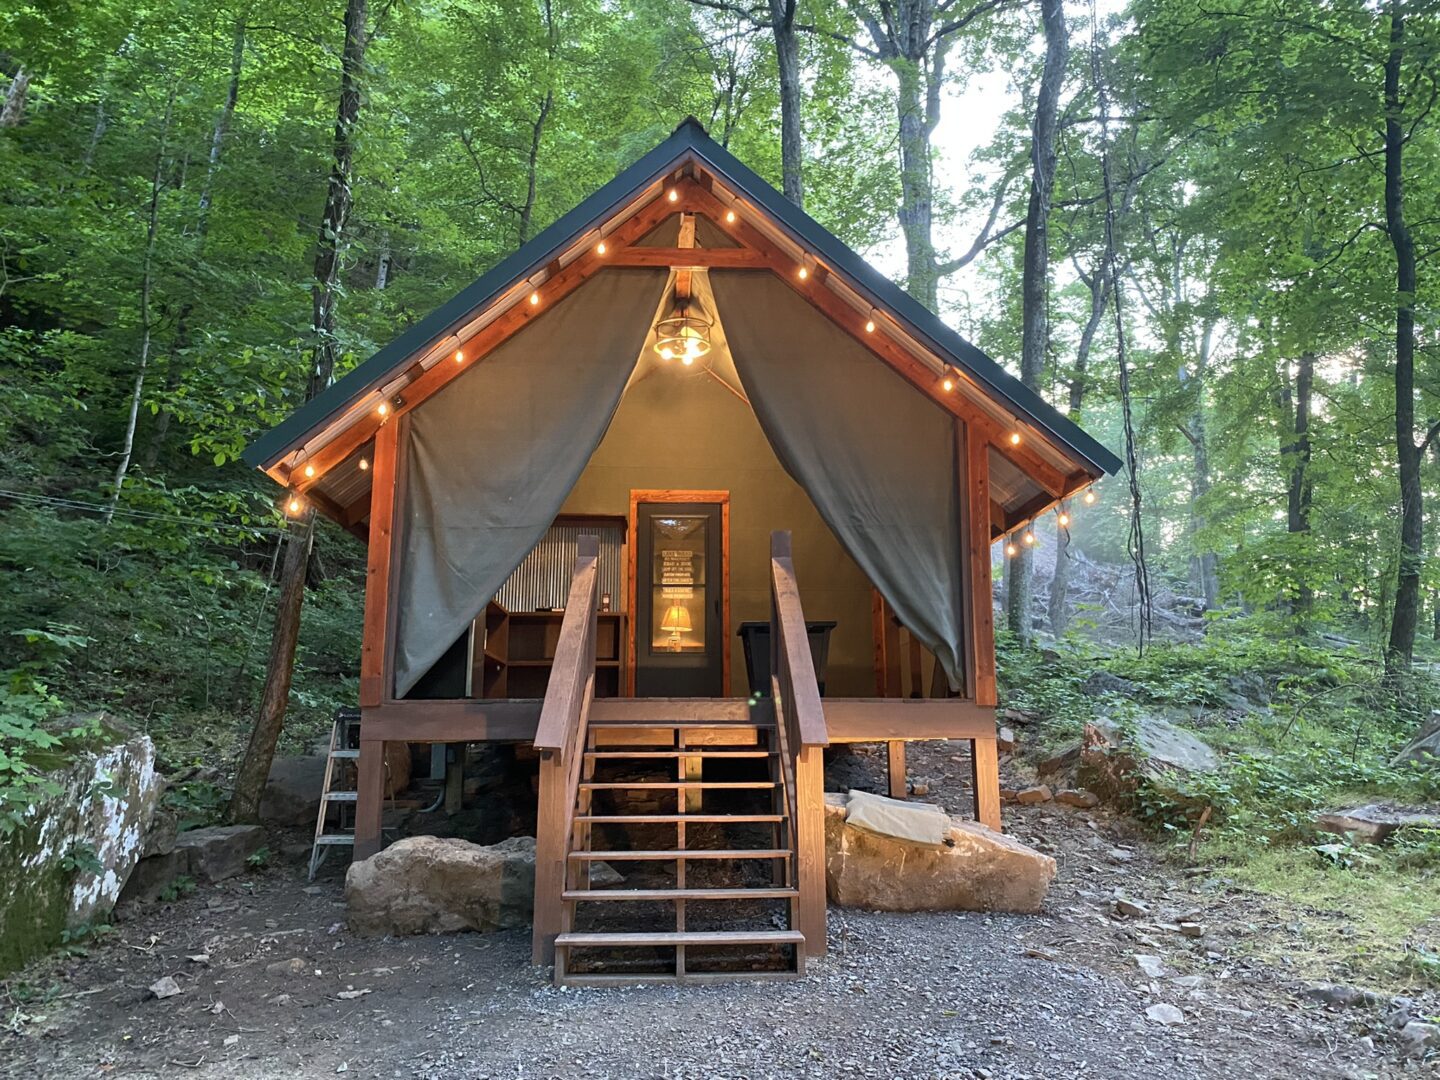 A tent in the woods with lights on.